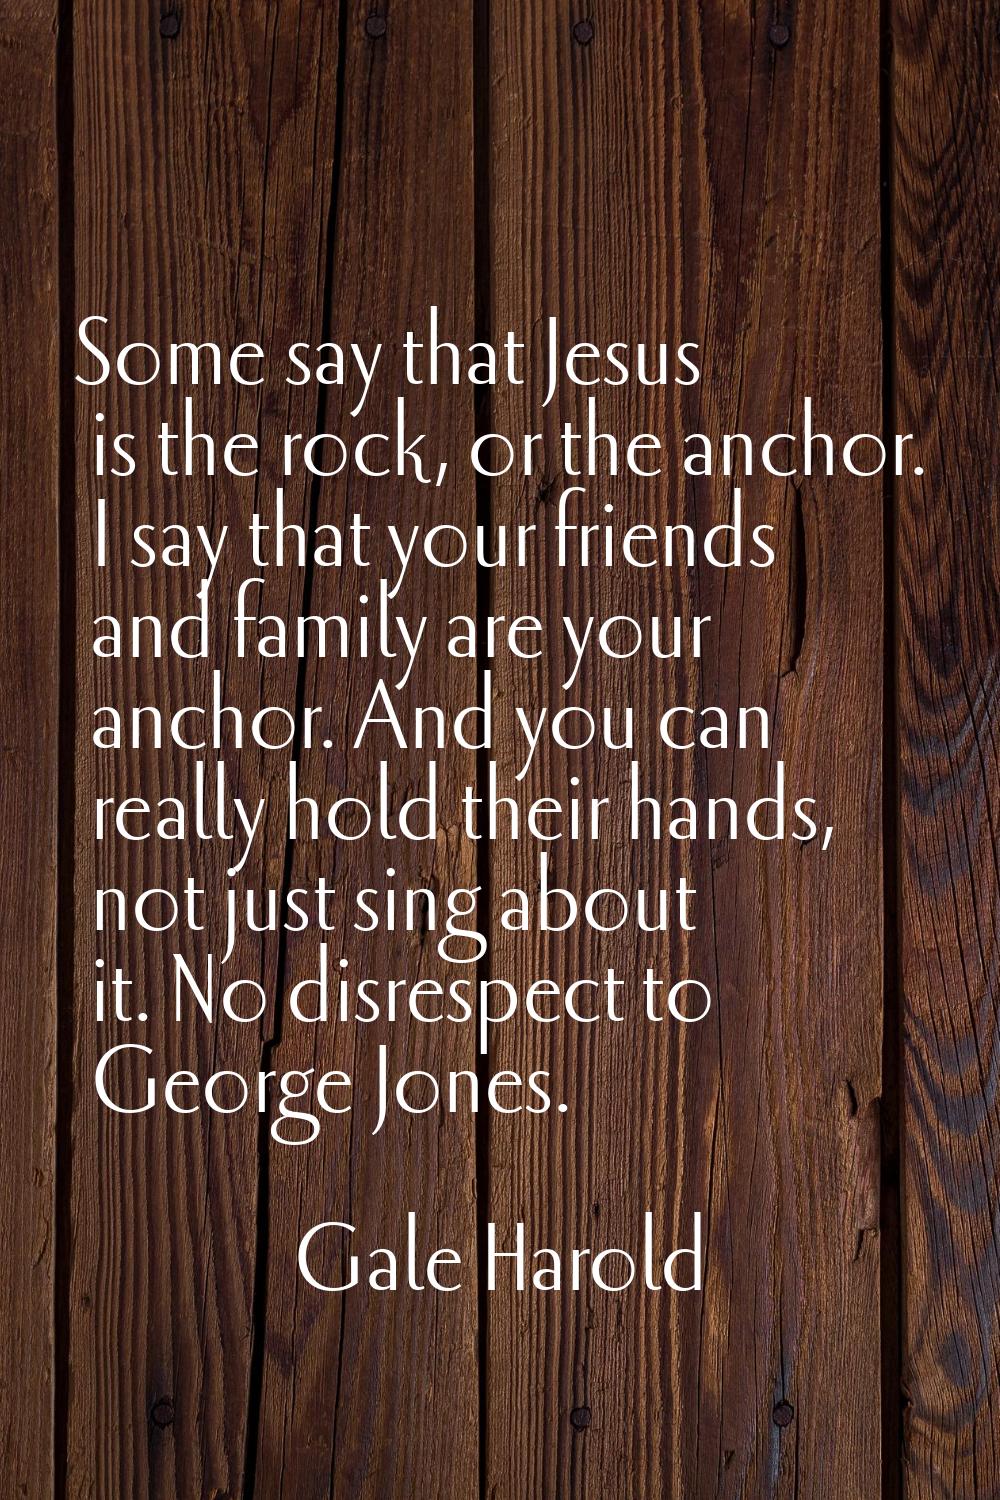 Some say that Jesus is the rock, or the anchor. I say that your friends and family are your anchor.